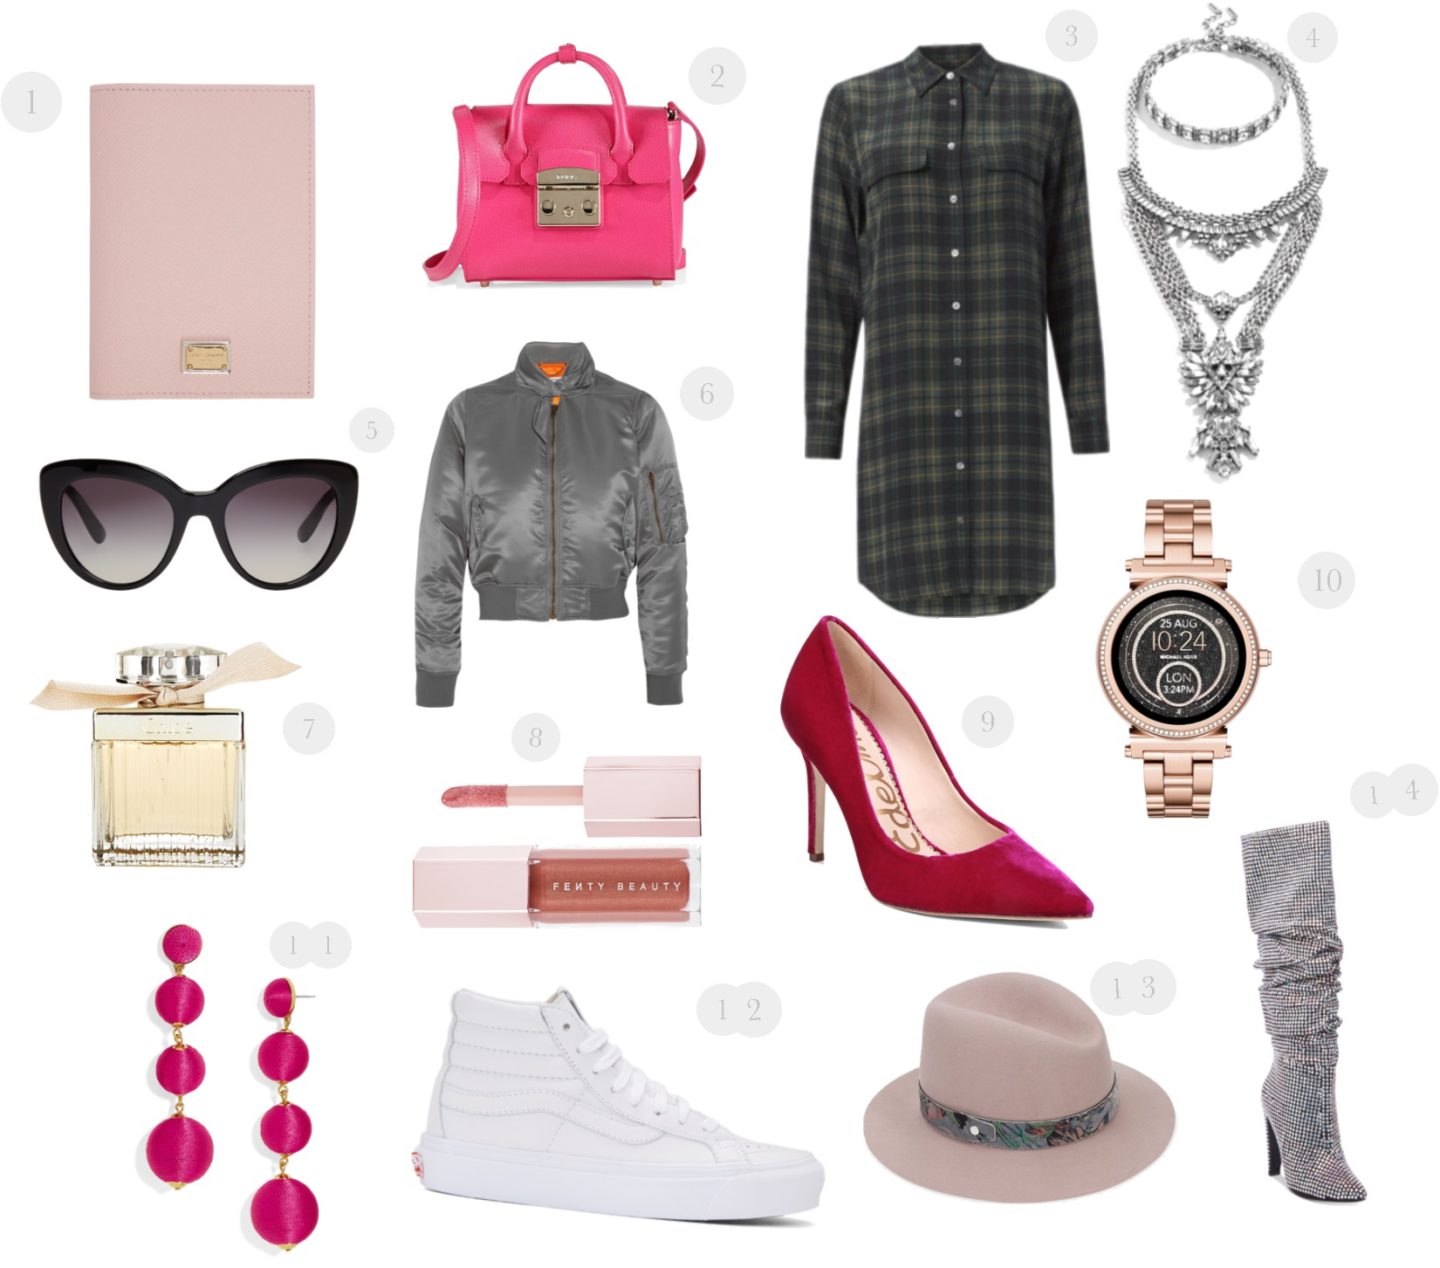 Thursday Things: Love Story, Michael Kors Sofie watch, Instagram: @pslilyboutique, Pinterest, Los Angeles fashion blogger, top fashion blog, best fashion blog, fashion & personal style blog, travel blog, LA fashion blogger, 1.4.18, Thursday things, inspiration, winter 2018 outfit ideas, love story, pink velvet heels, collage